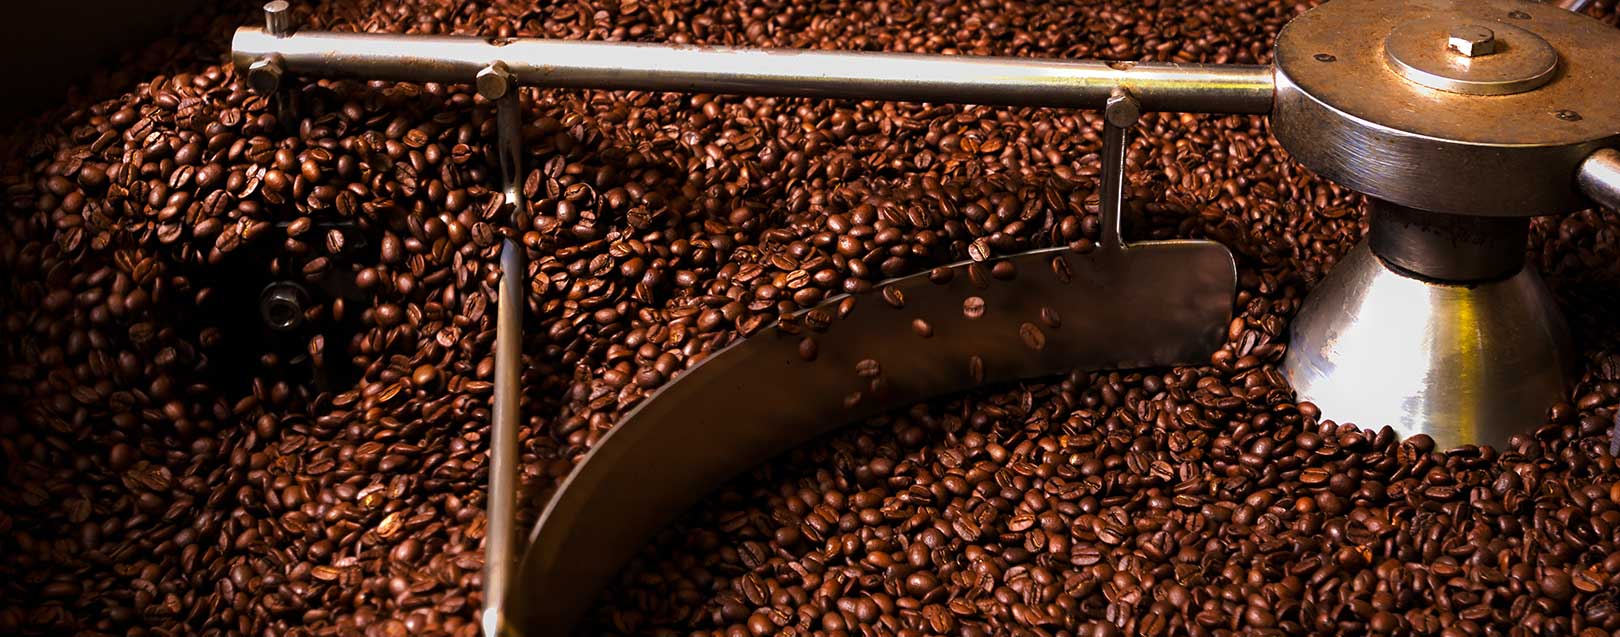 India cuts coffee production estimate for 2016-17 by 1%